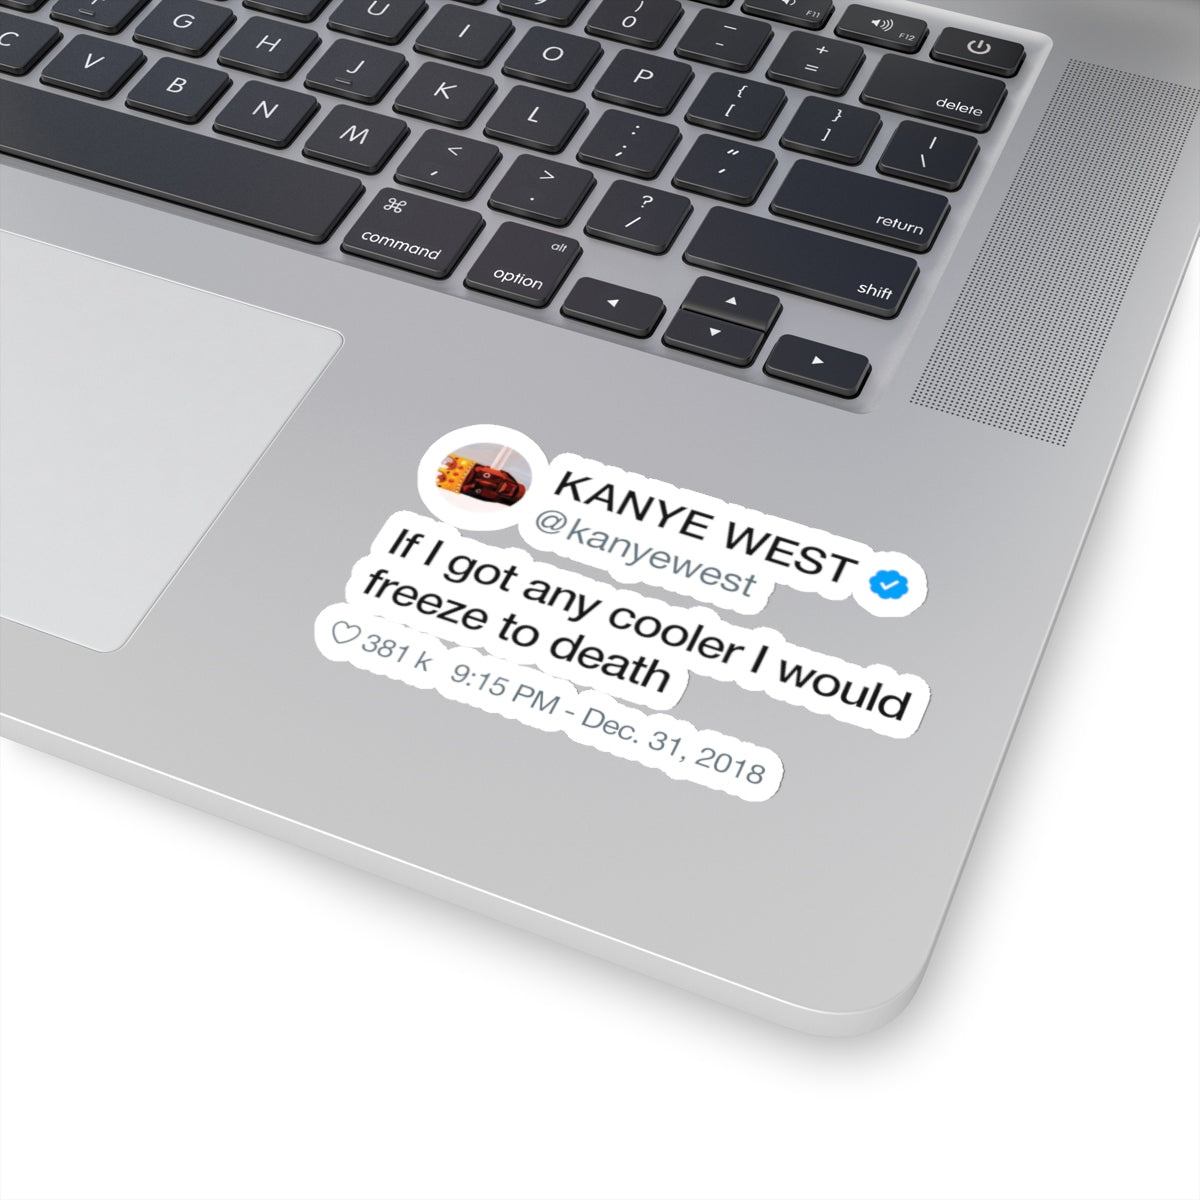 Kanye West Tweet quote If I got any cooler I would freeze to death Stickers-Archethype